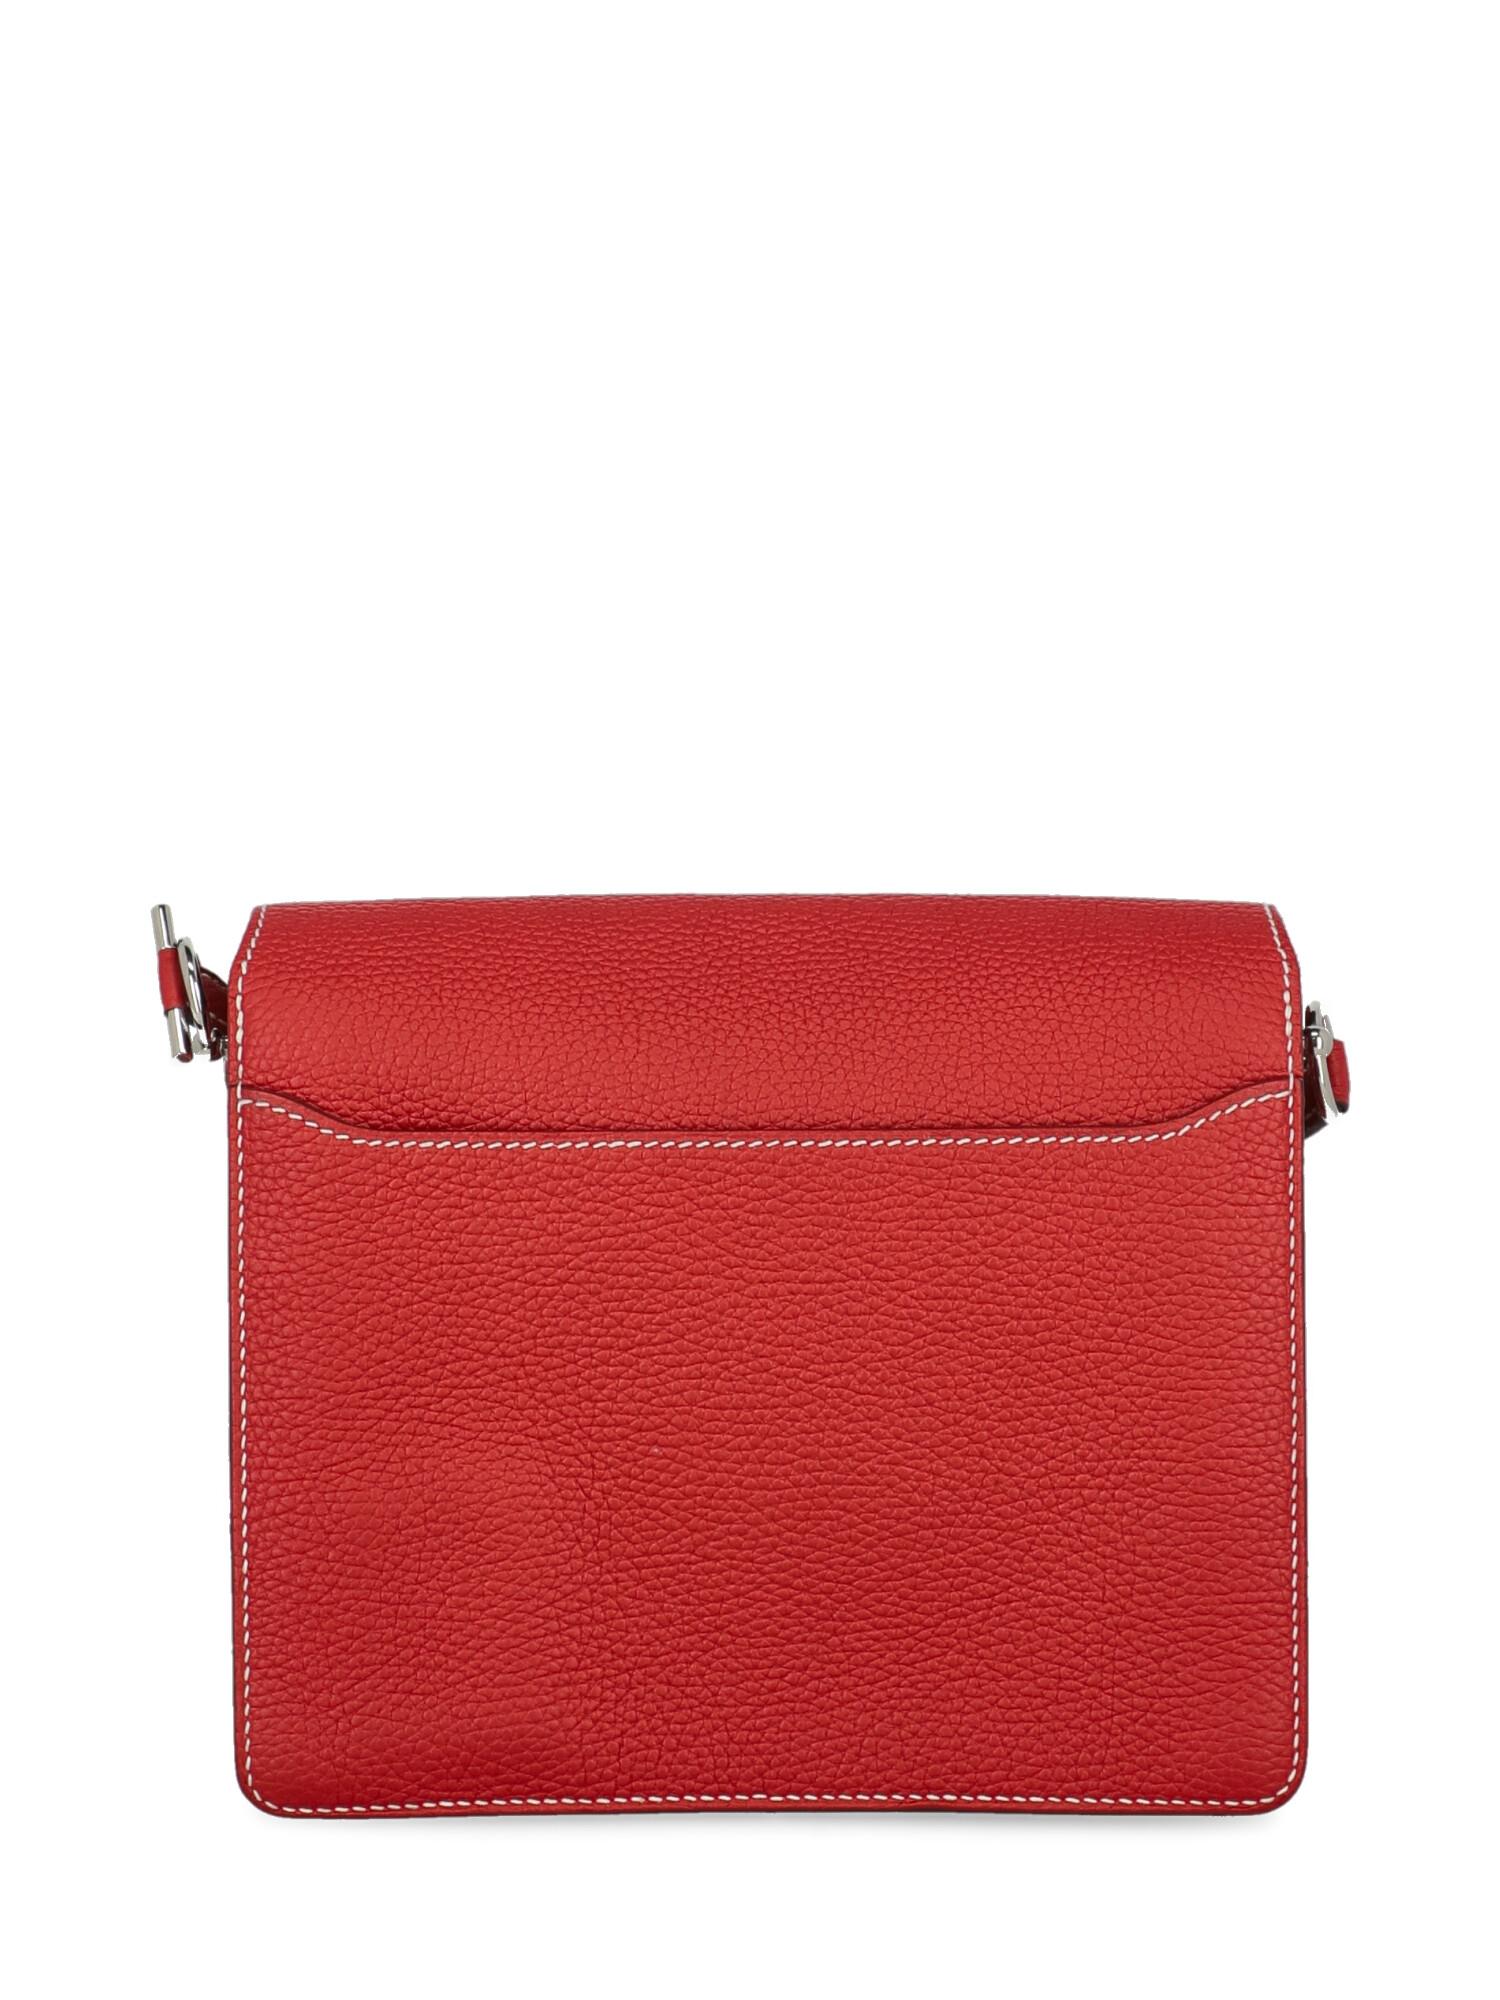 Hermès women’s Cross body bag Red Leather In Excellent Condition For Sale In Milan, IT